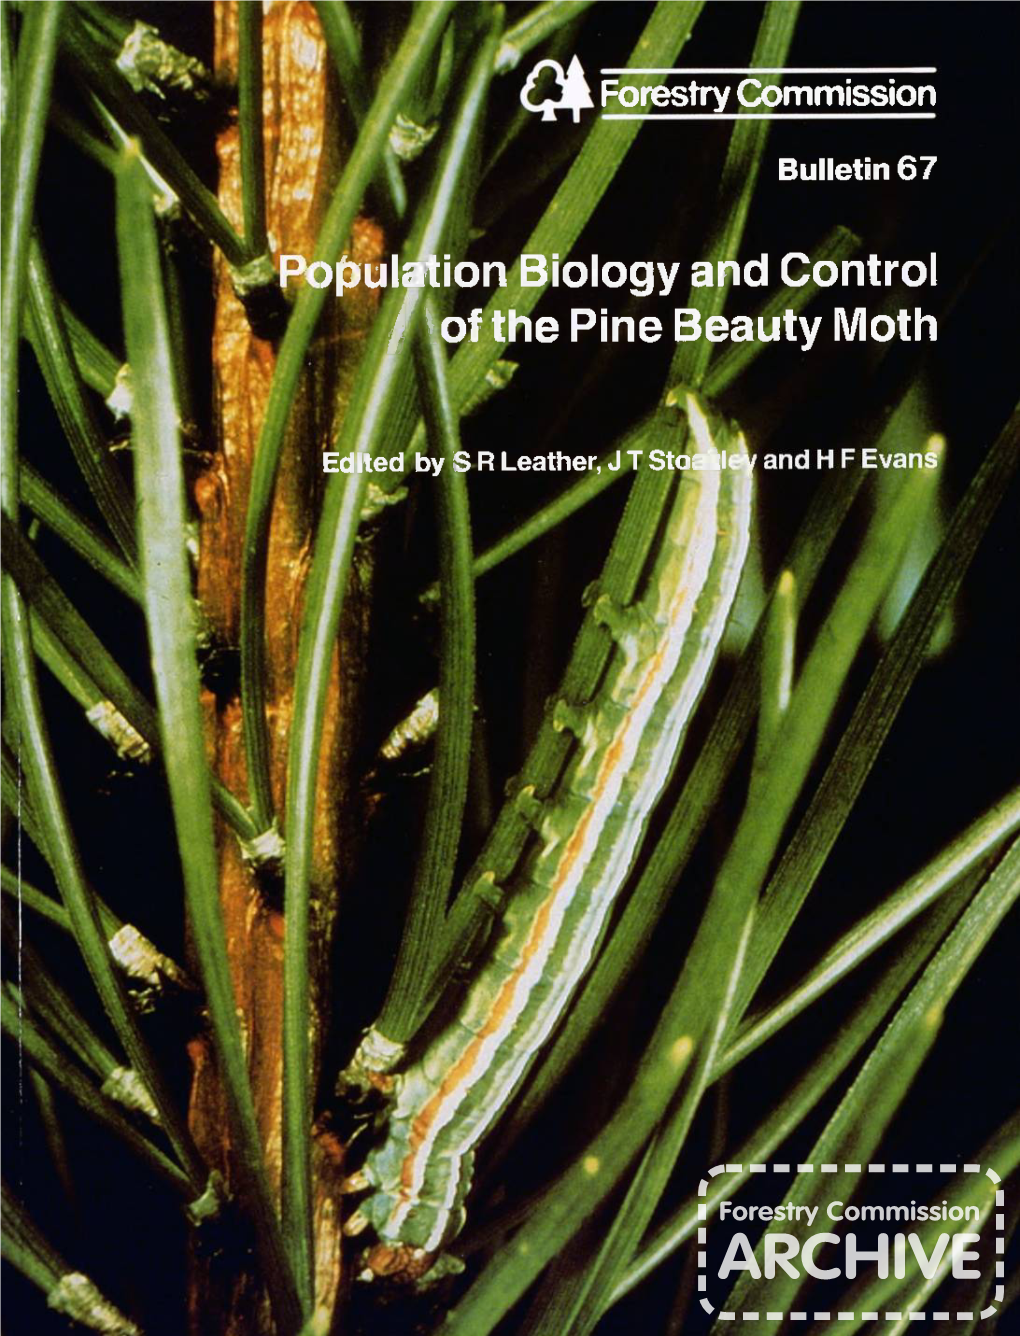 Population Biology and Control of the Pine Beauty Moth